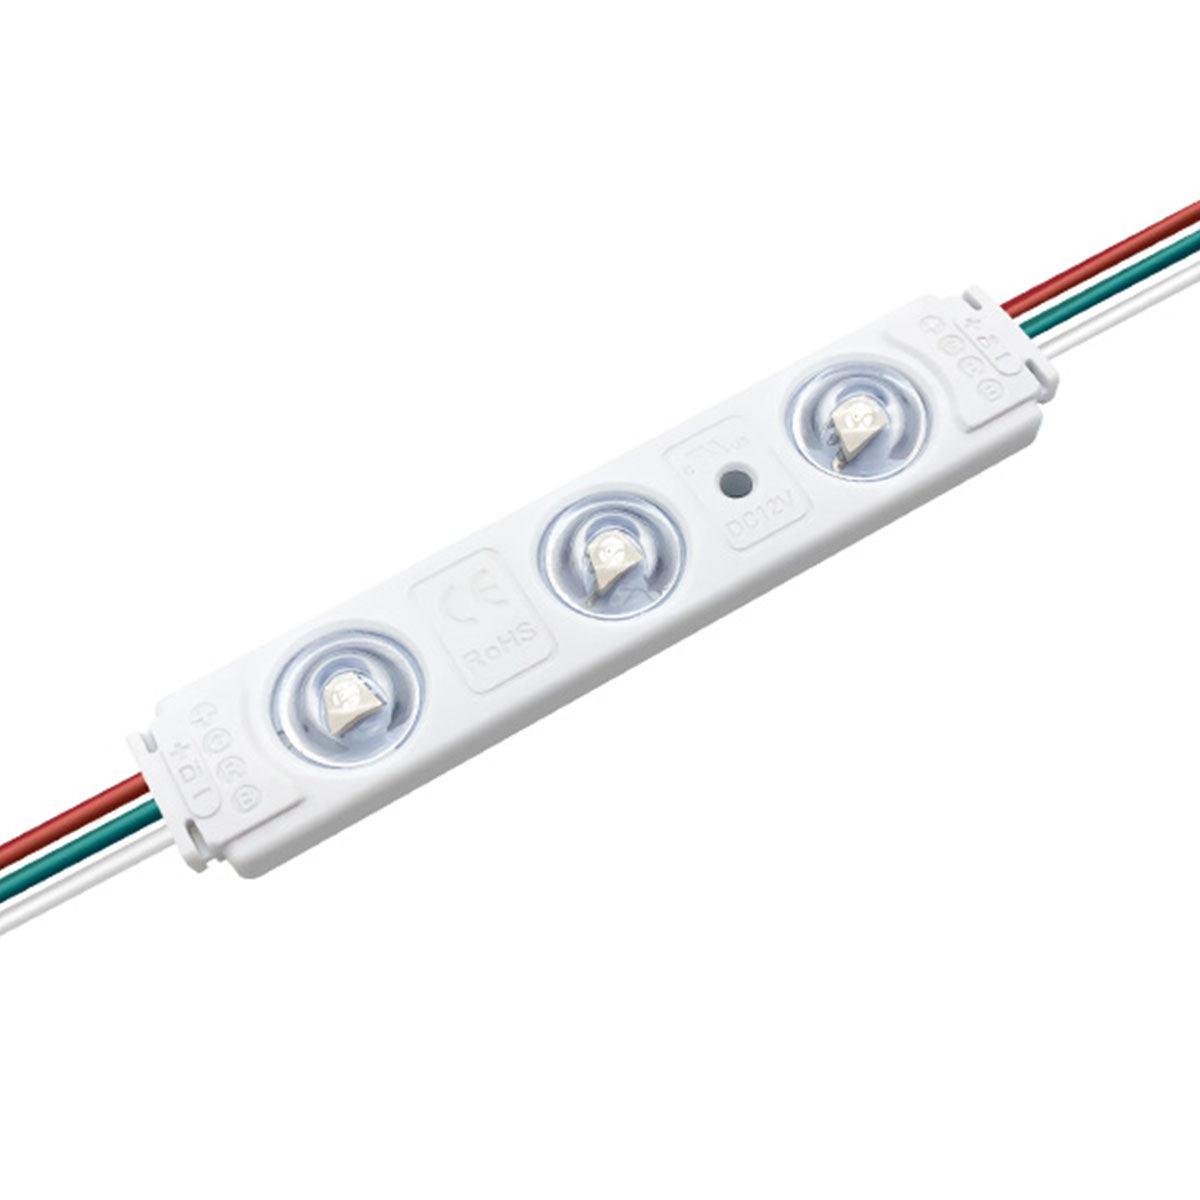 143in. LED Channel Ray, 3 LEDs, 100 Lumens per Module, 20pcs per string, RGBW, 12VDC - Bees Lighting